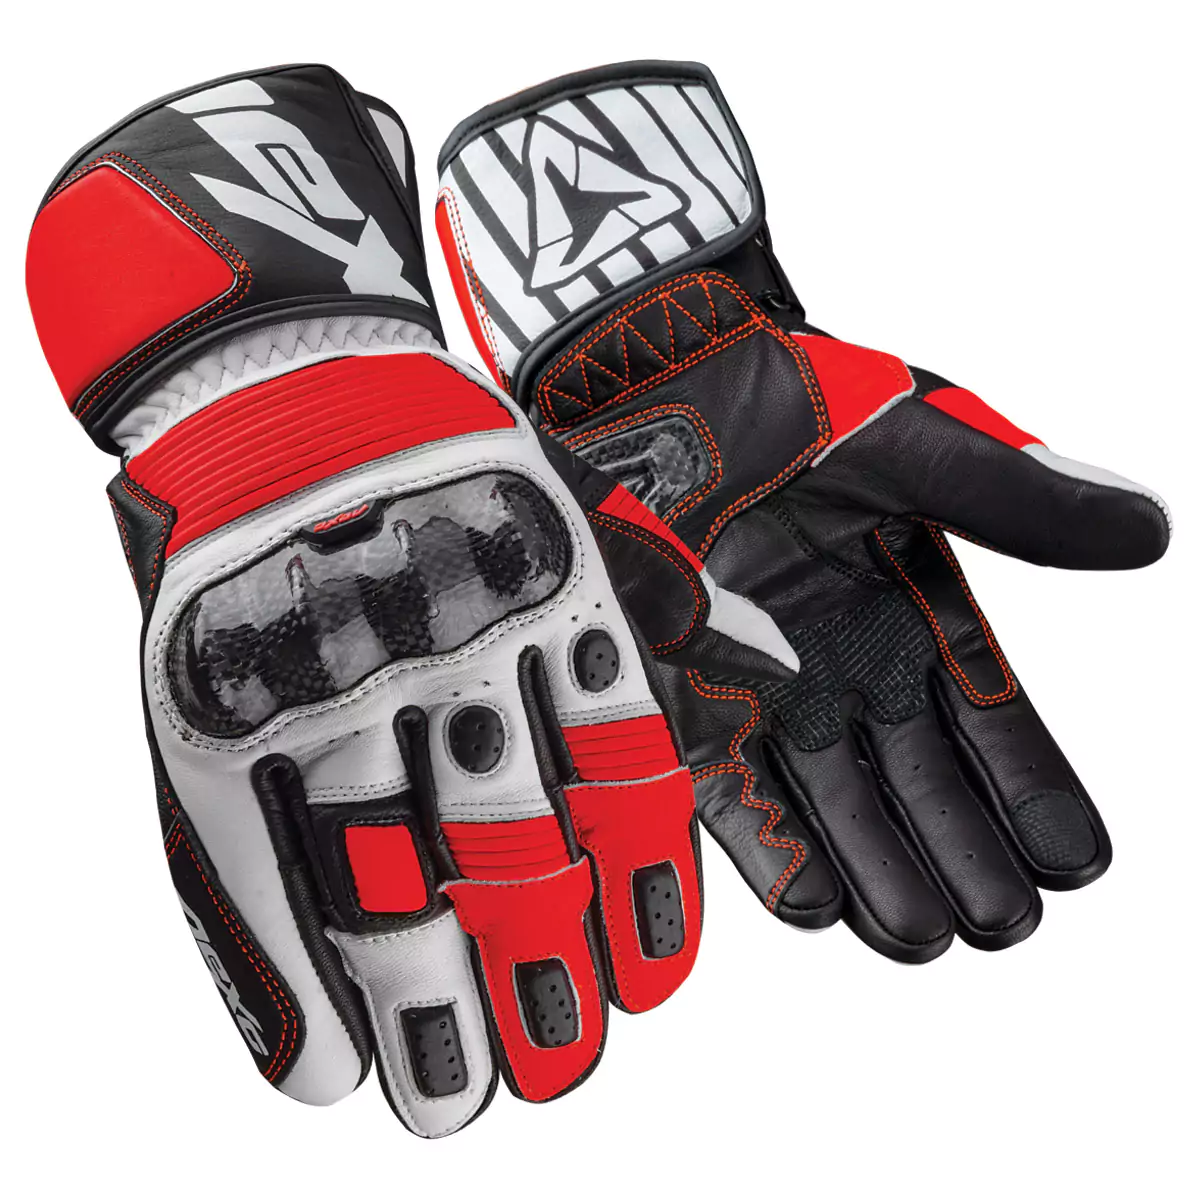 Pair of motorcycle racing gloves, featuring protective armor and knuckle guards.